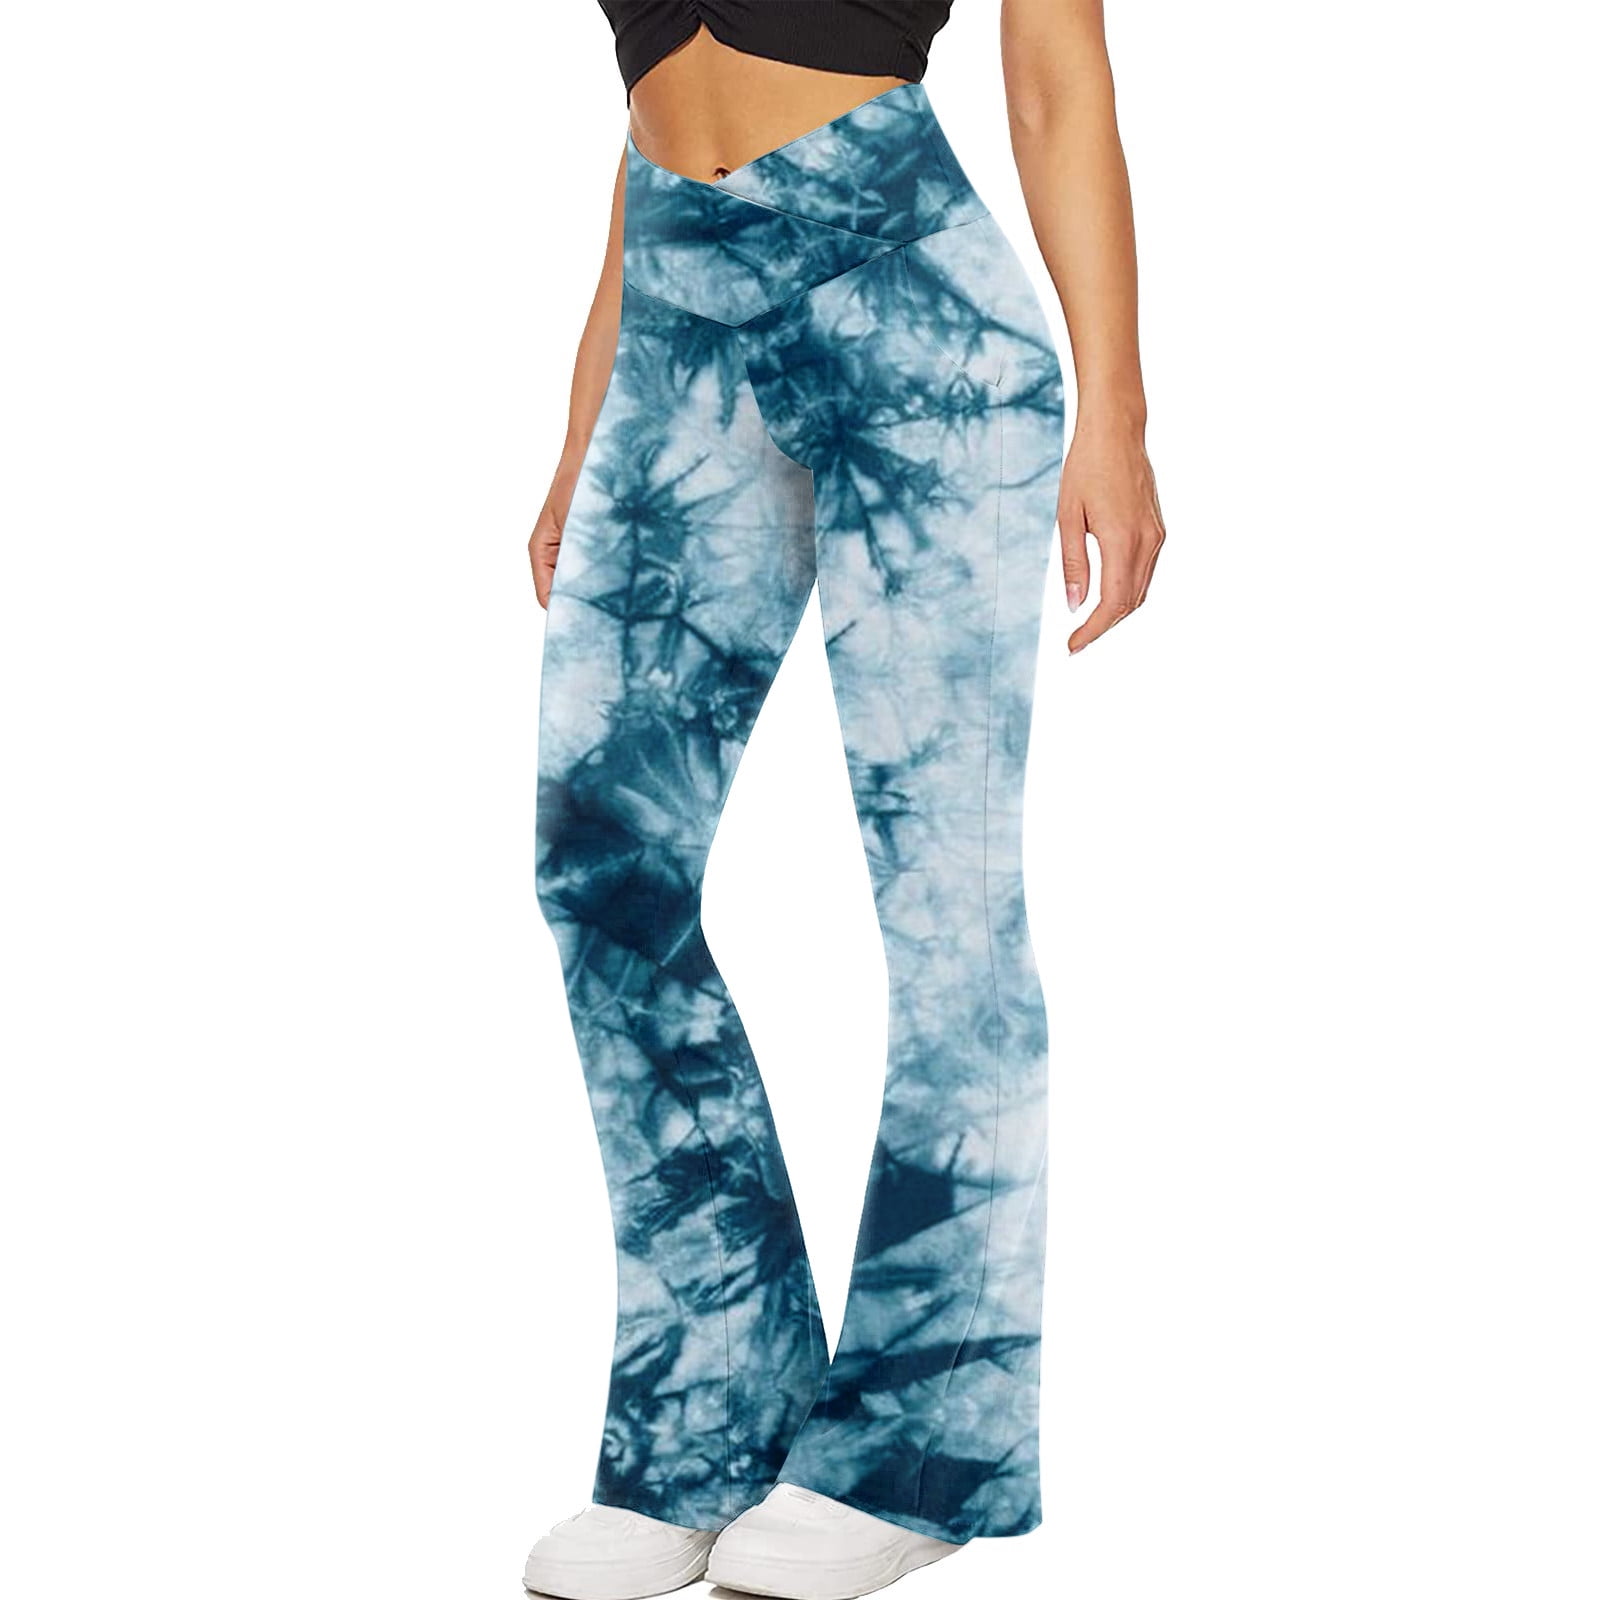 YWDJ Yoga Flare Pants for Women Flared Bell Bottom Casual Printed